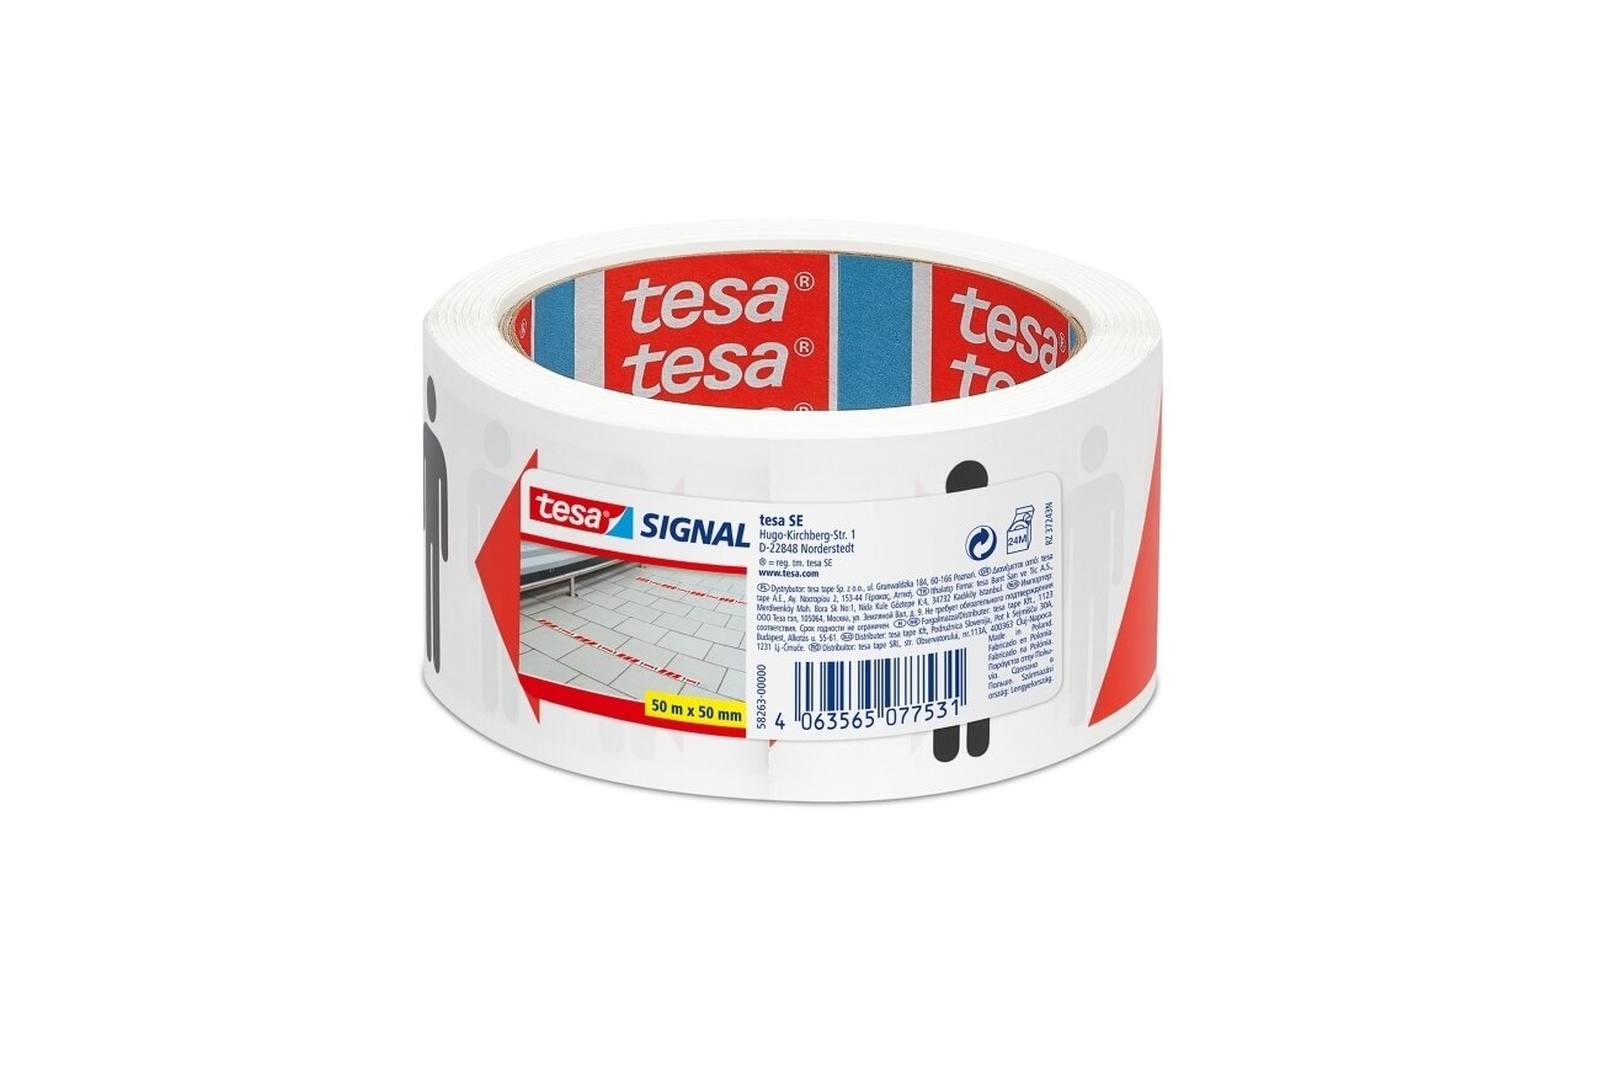 Tesa Keep a signal distance of 1.5 metres, PP, 50mmx50m RED-WHITE